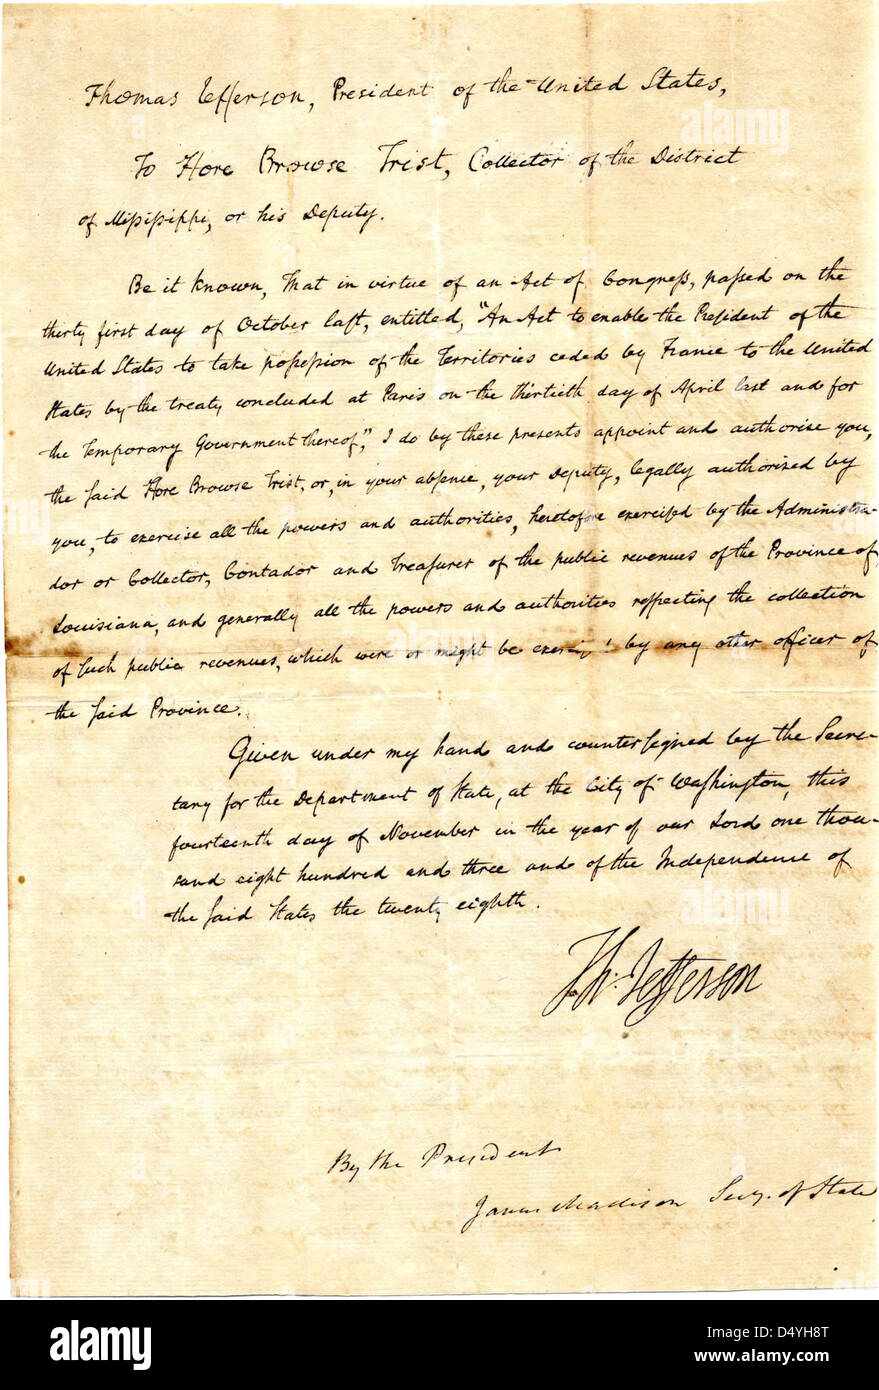 Letter from Thomas Jefferson to Hore Browse Trist as Collector for the District of Mississippi, 11/14/1803 Stock Photo